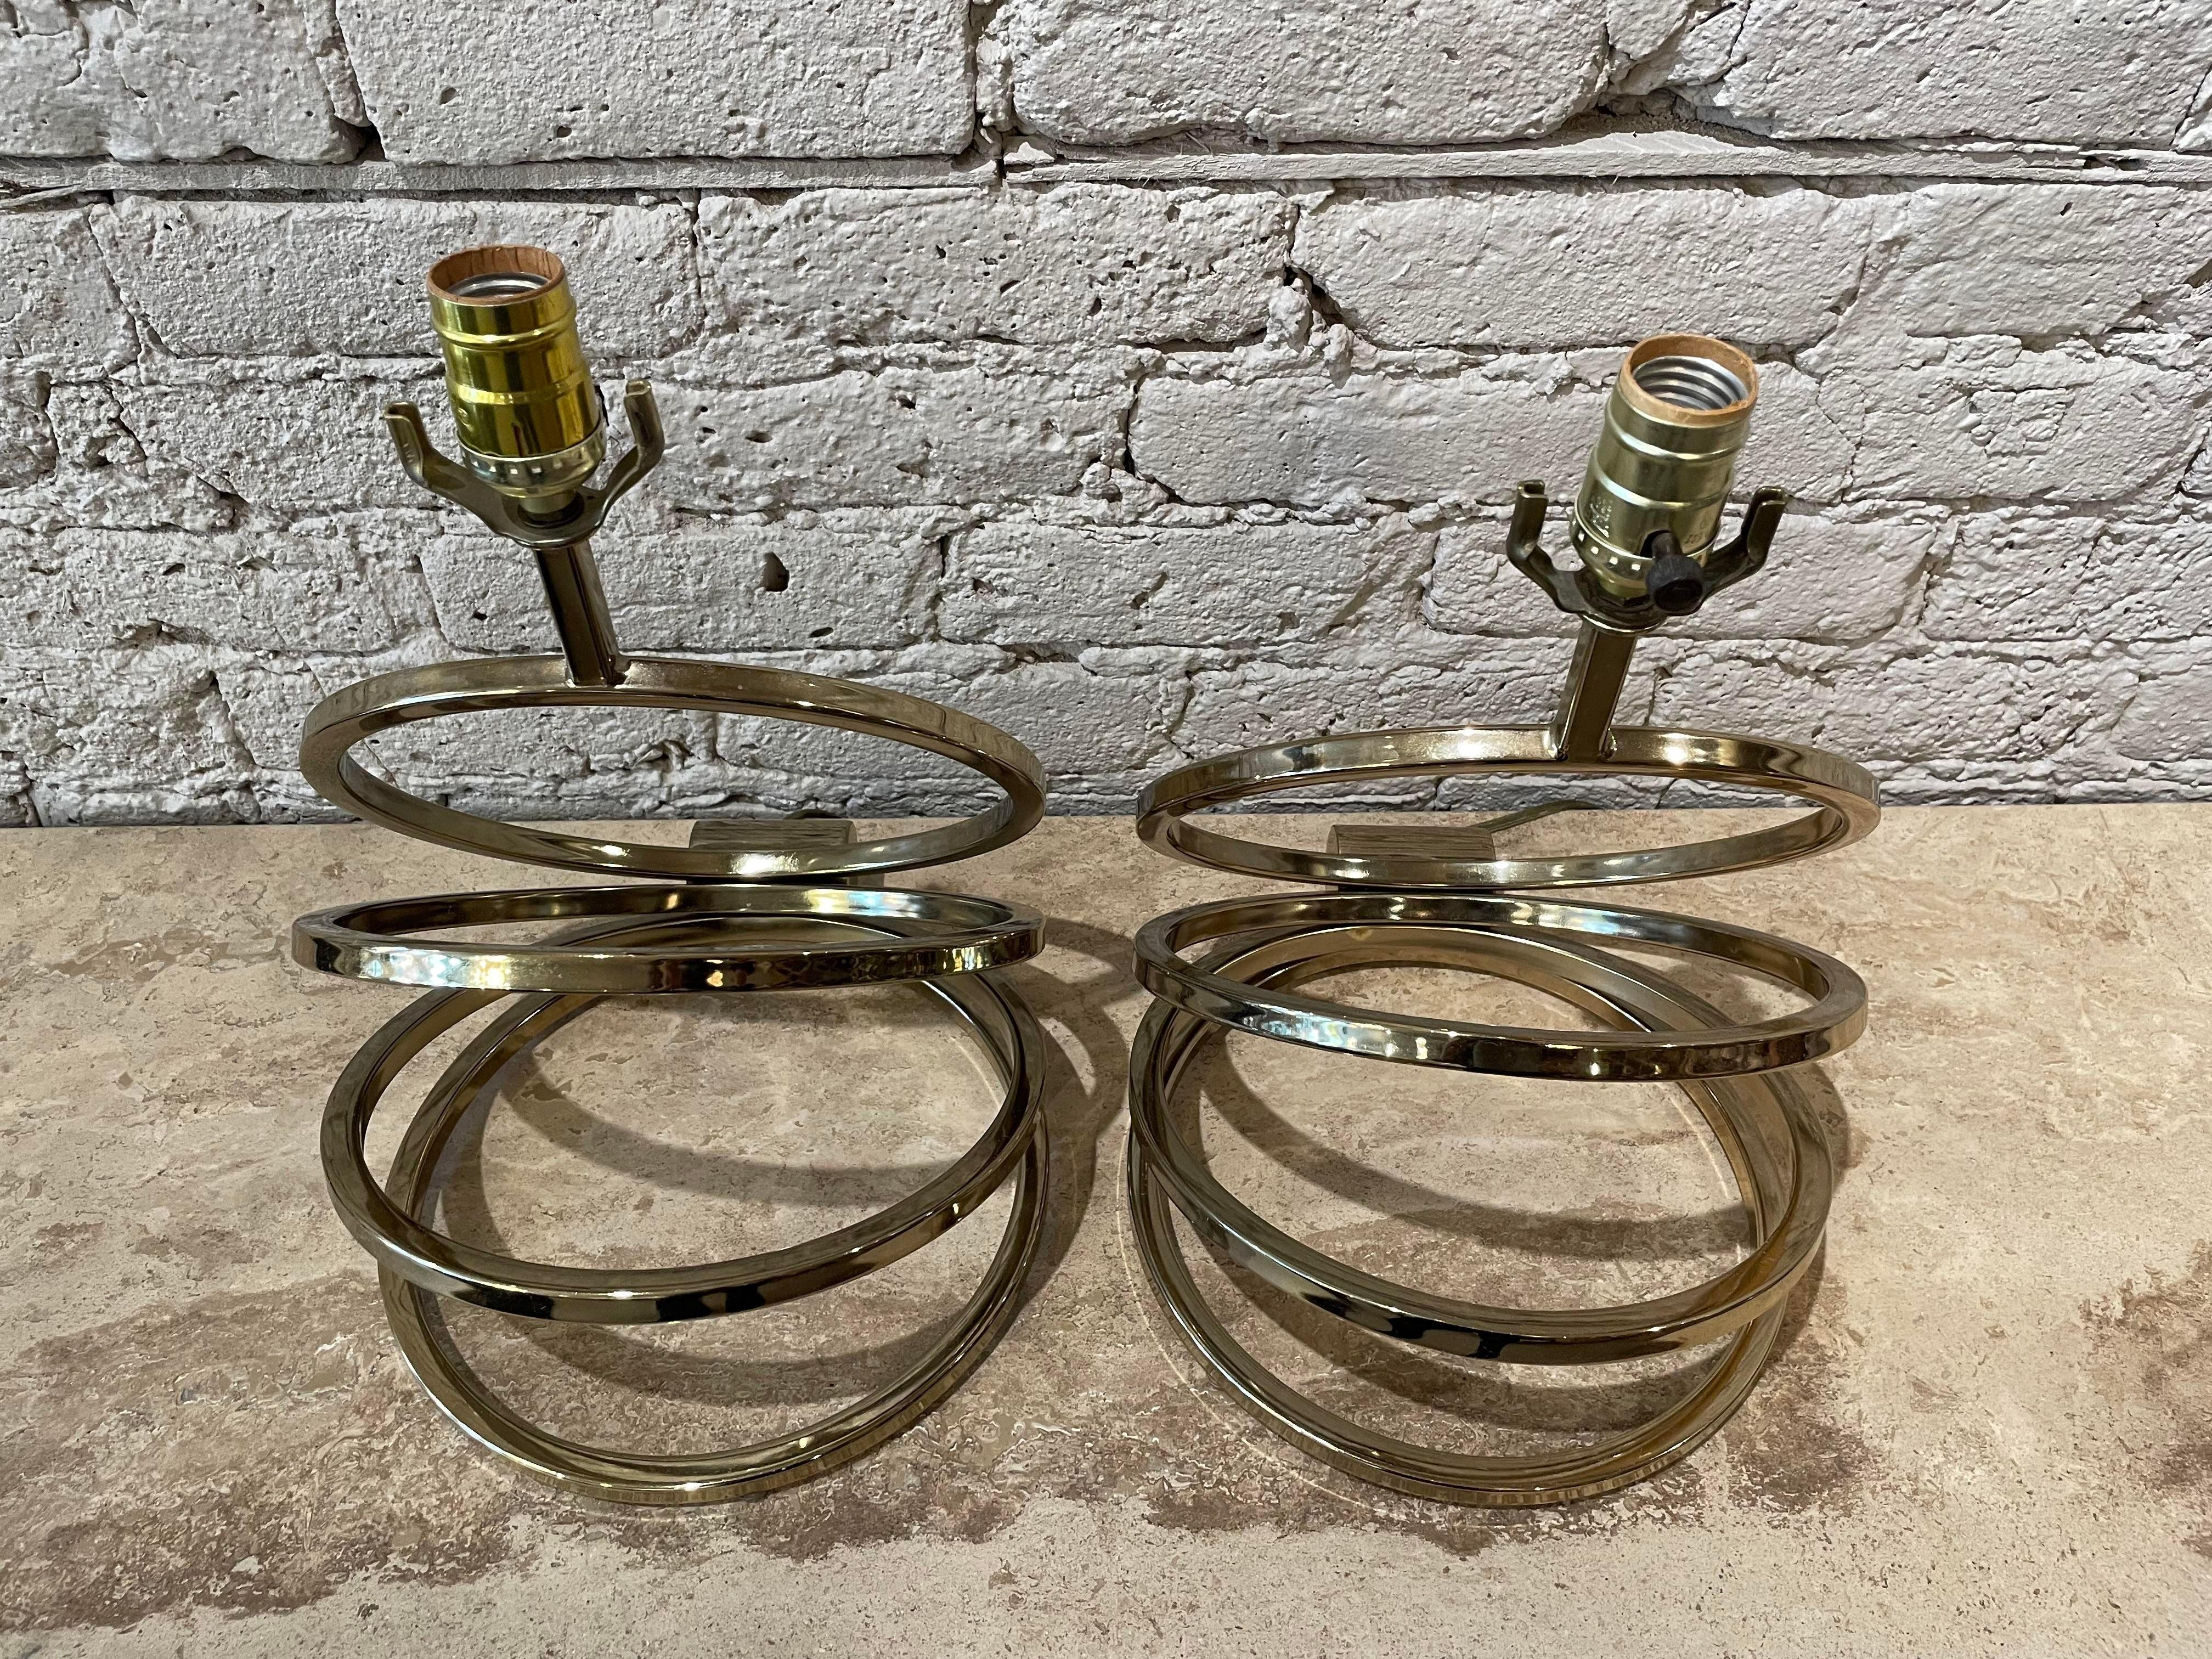 1960s Hollywood Regency Mid Century Vintage Brass Spiral Lamps - a Pair In Good Condition For Sale In Chicago, IL